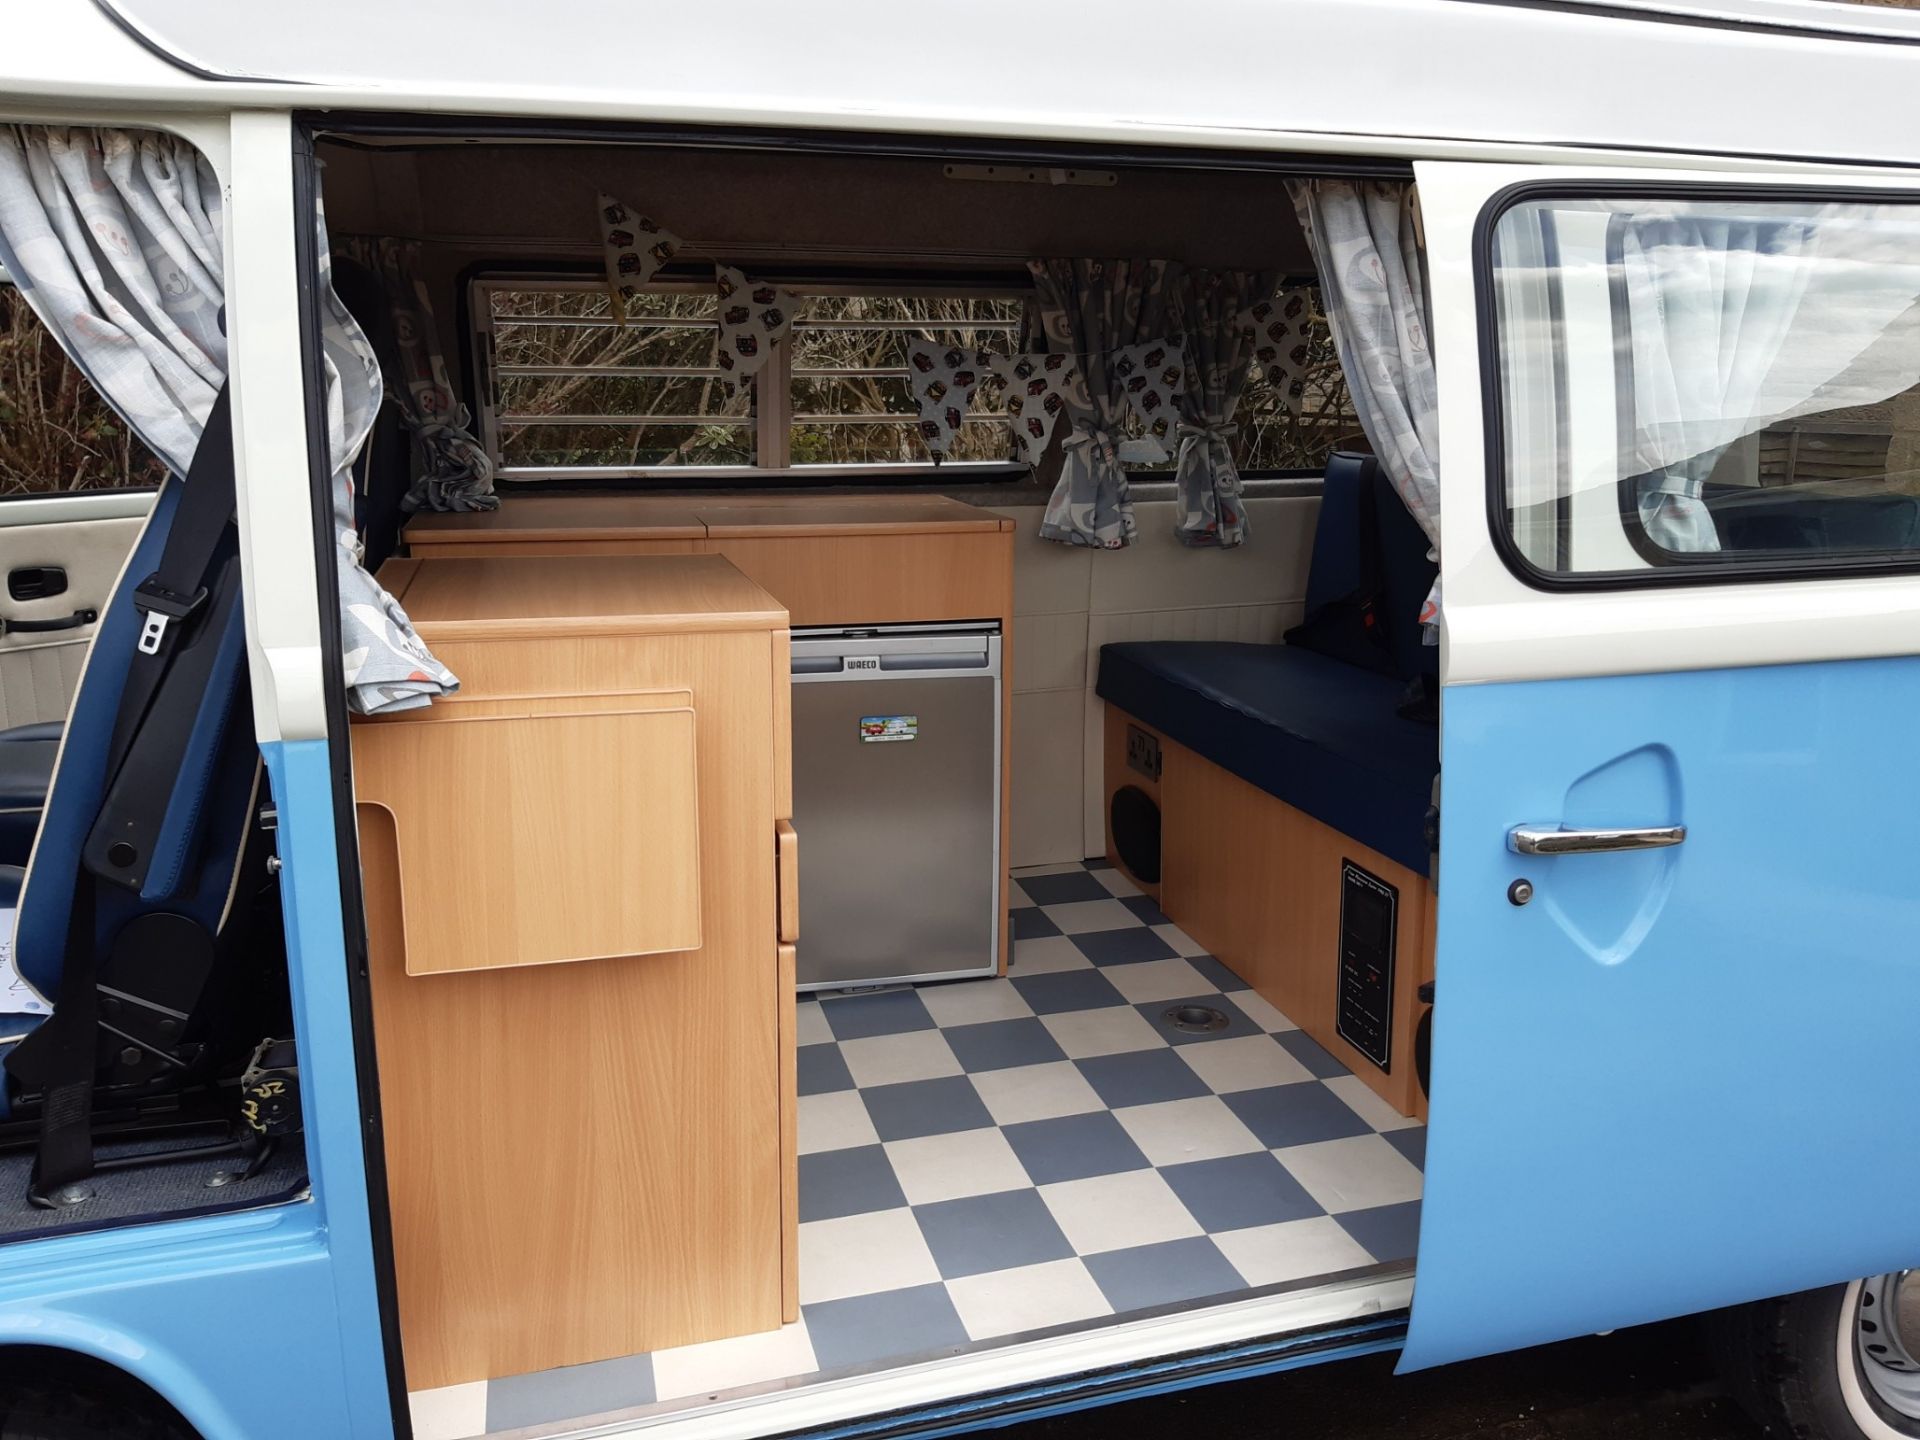 1976 VW Late Bay Window Camper Van Registration number LGY 254P White over blue with blue interior - Image 11 of 11